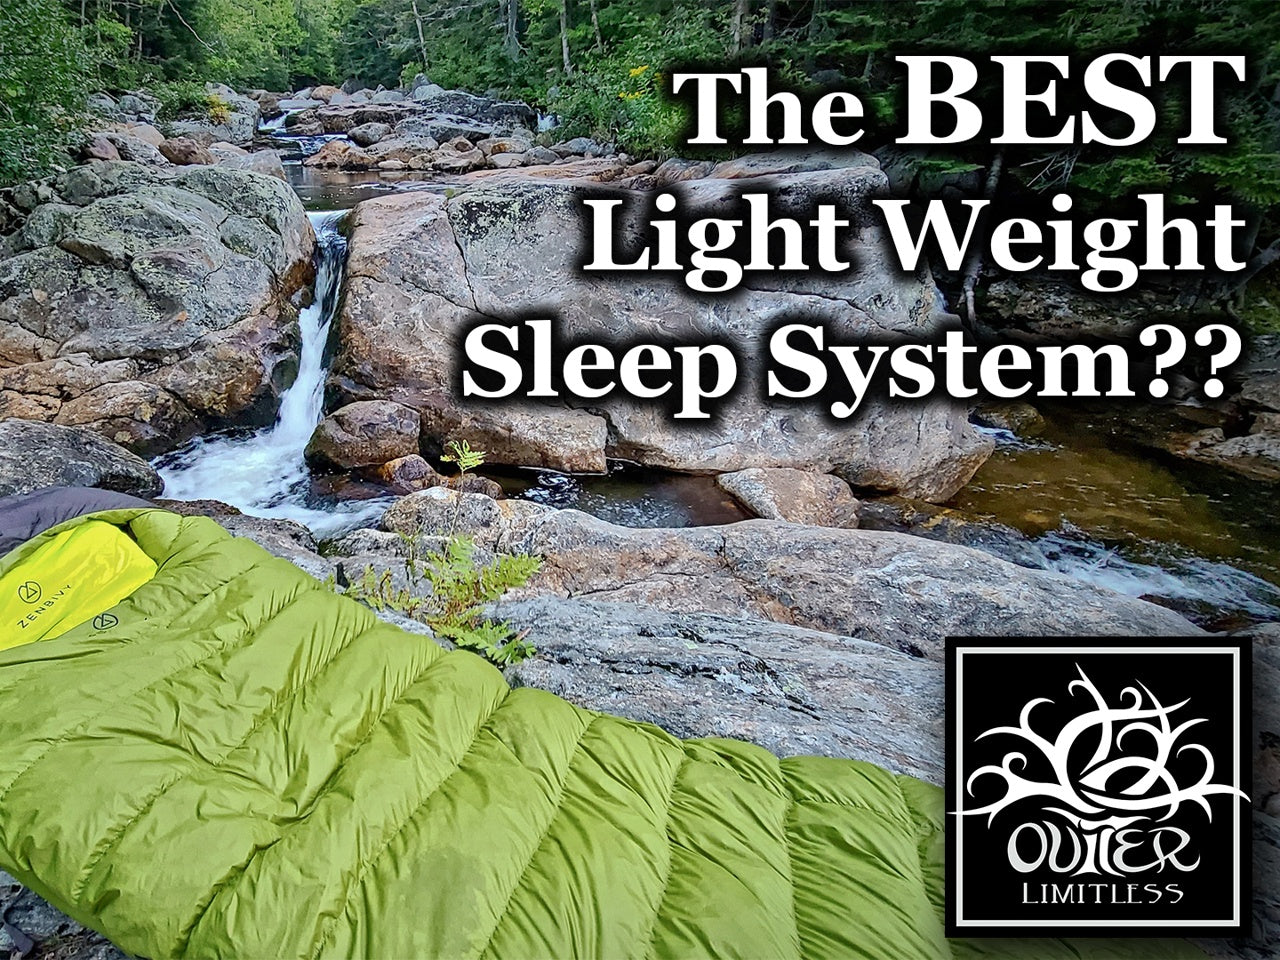 WATCH: Outer Limitless reviews the Light Bed 25°